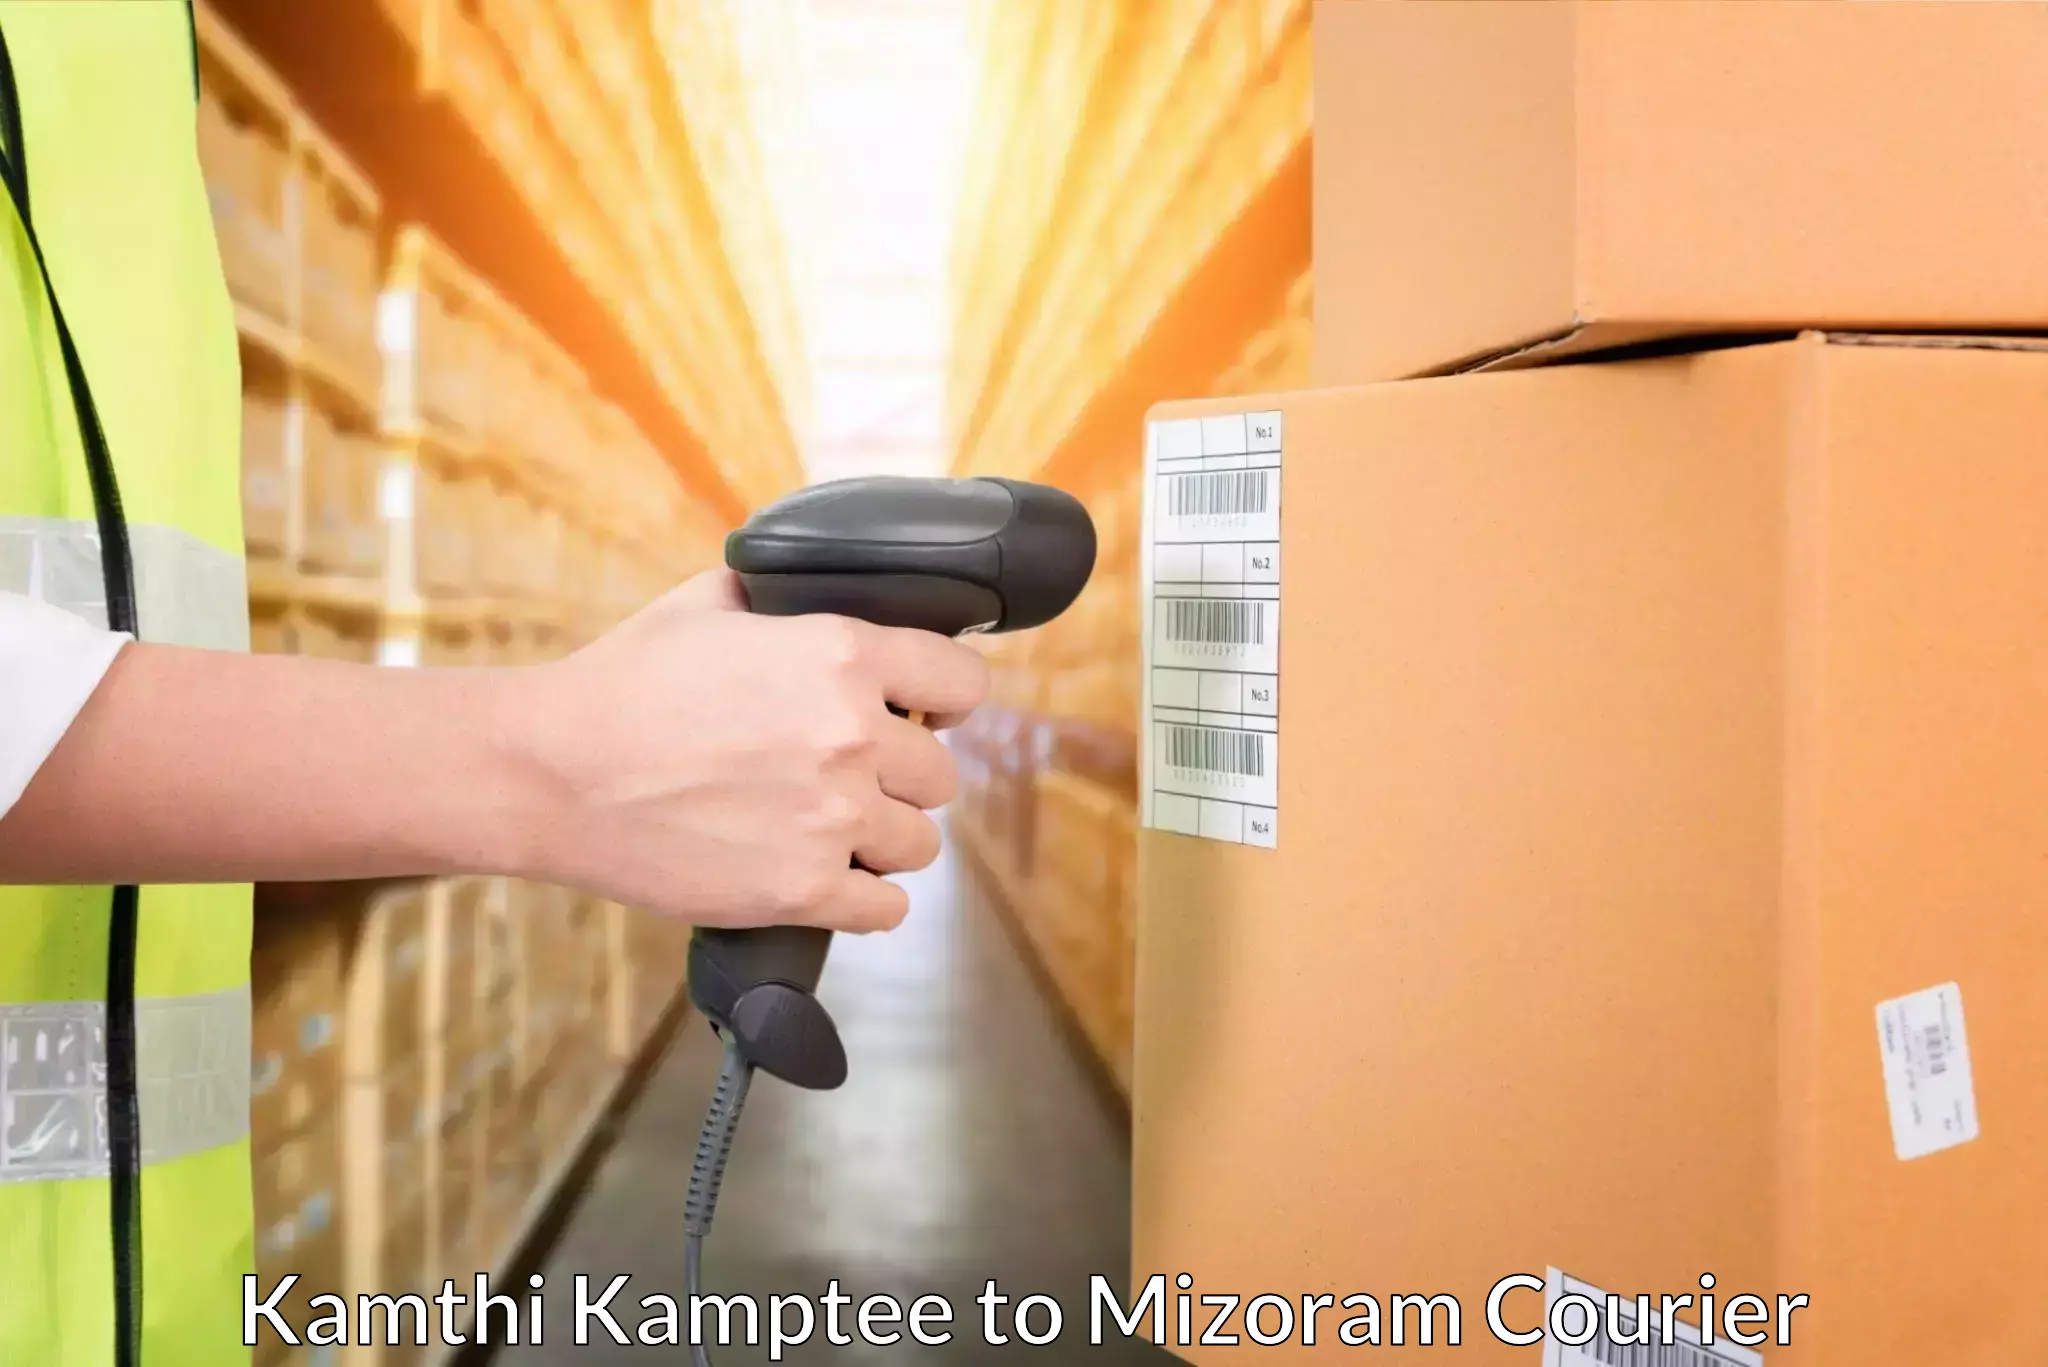 Customer-oriented courier services Kamthi Kamptee to Mizoram